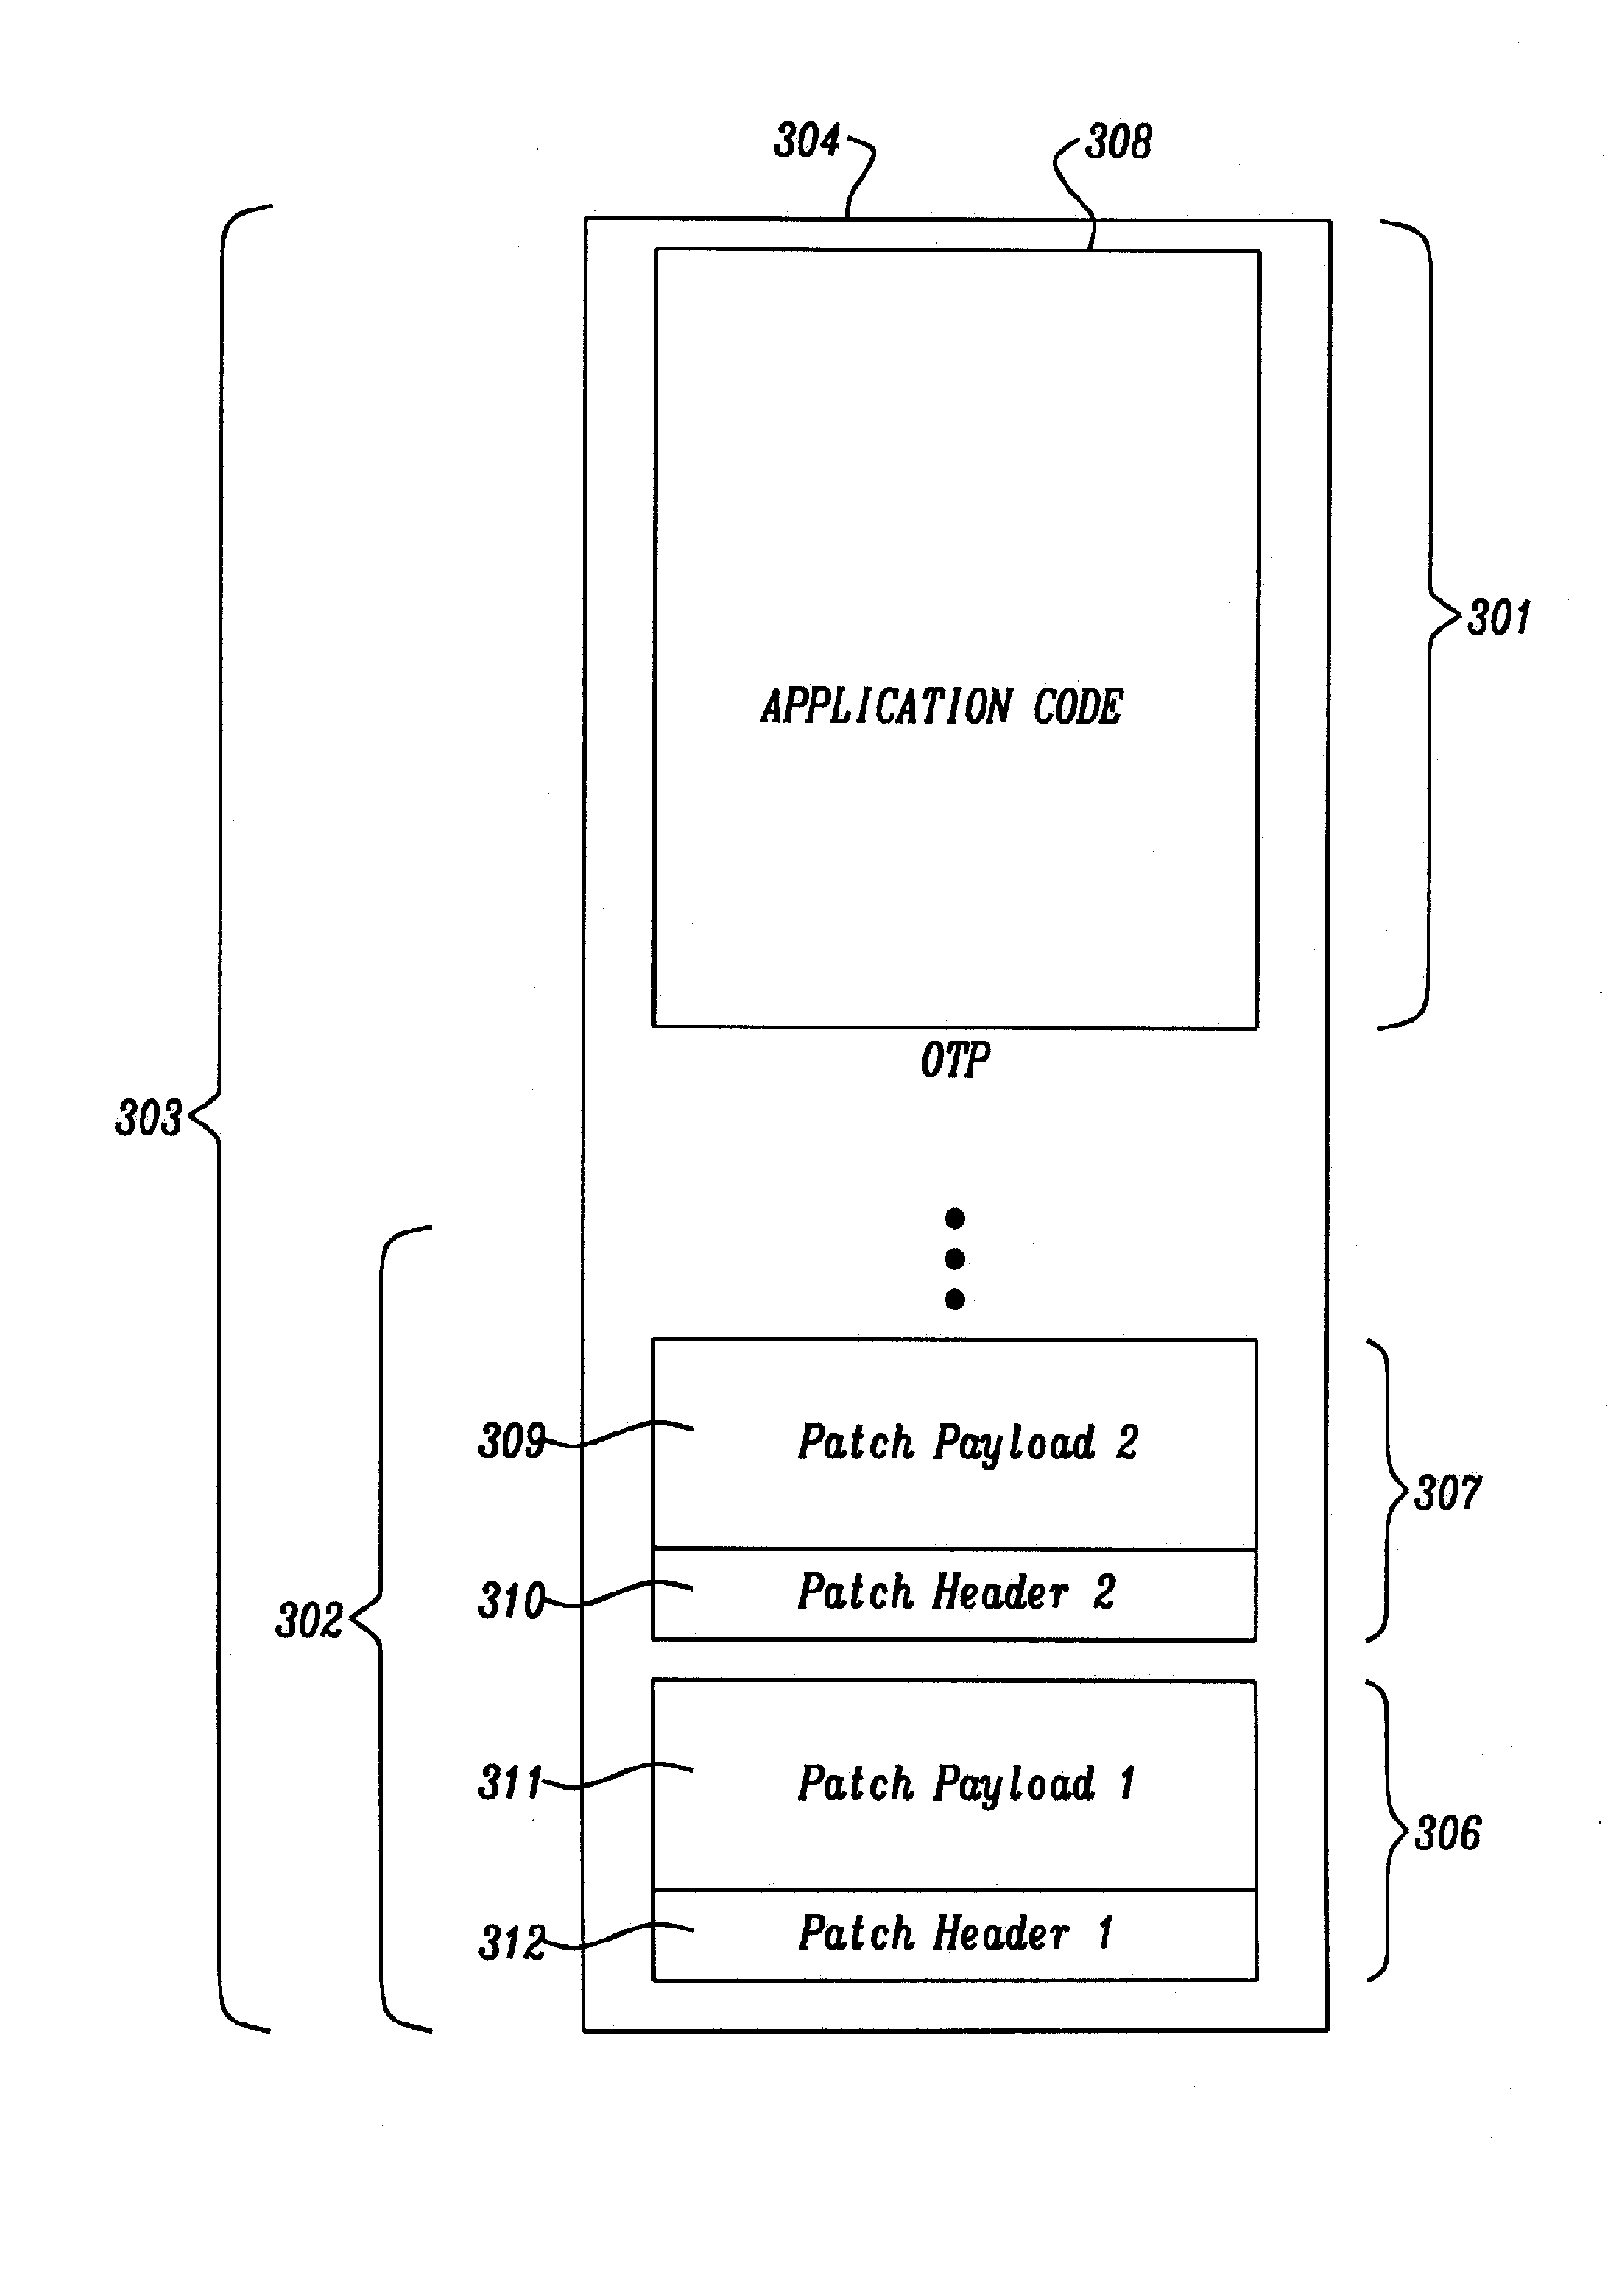 Integrated Circuit with a Patching Function